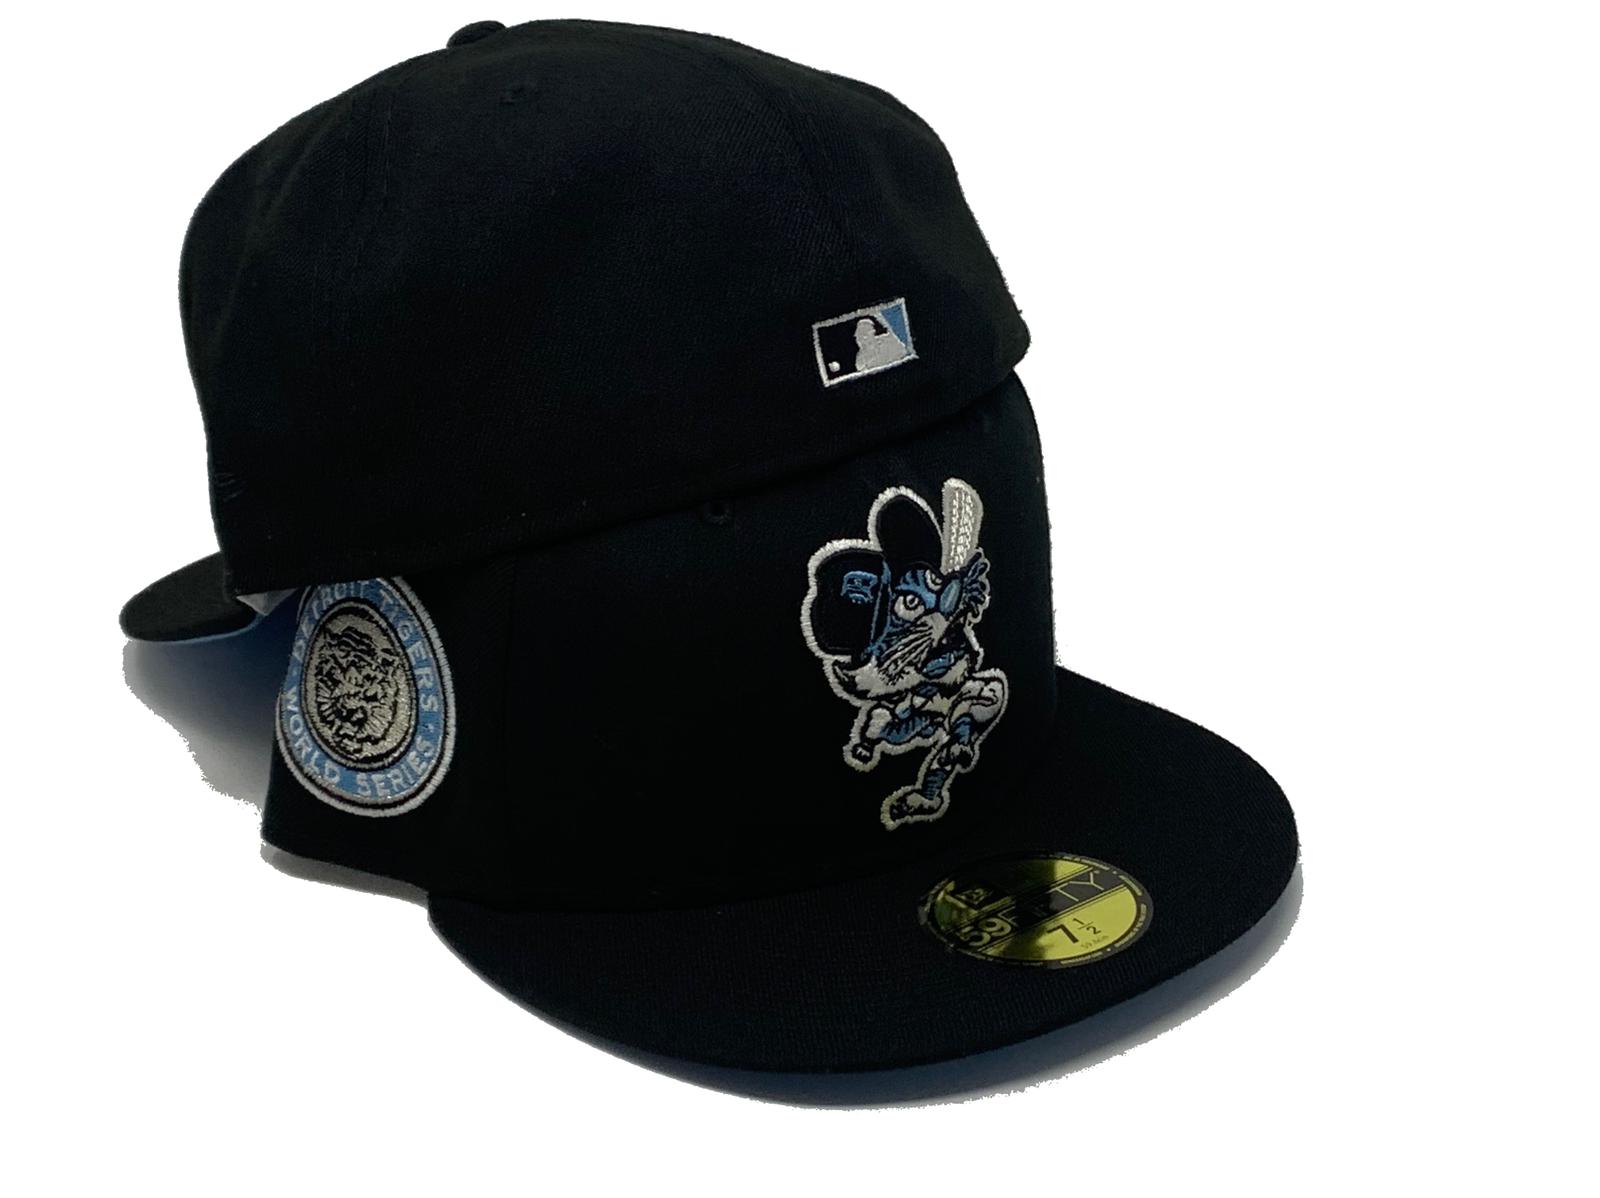 Detroit Tigers On Black 59FIFTY Black New Era Fitted Hat